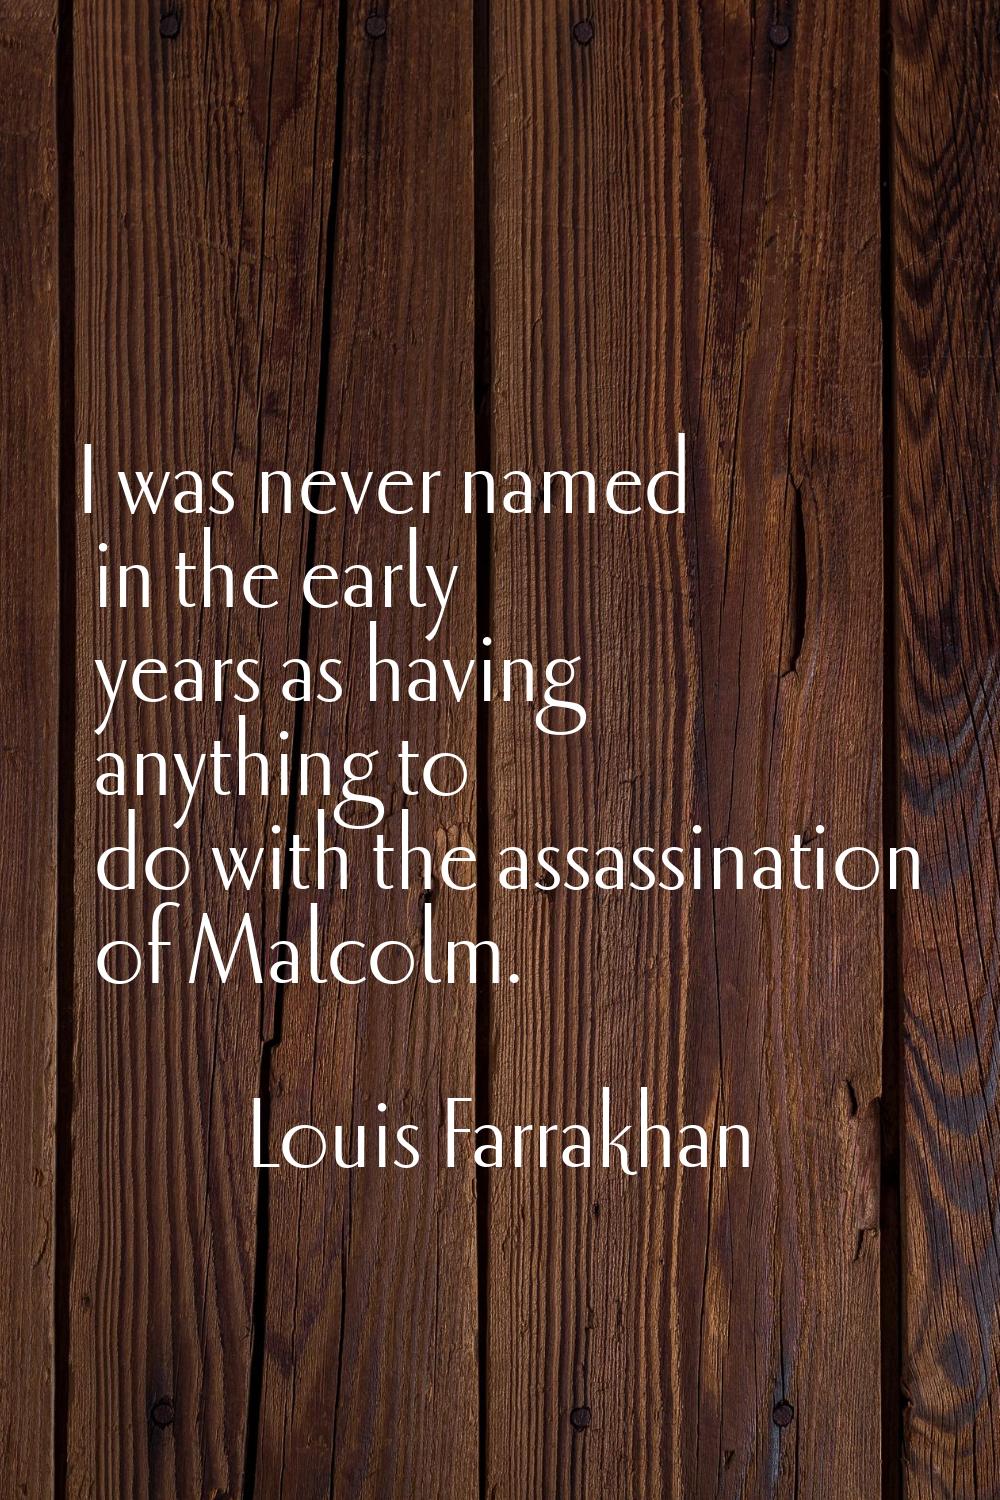 I was never named in the early years as having anything to do with the assassination of Malcolm.